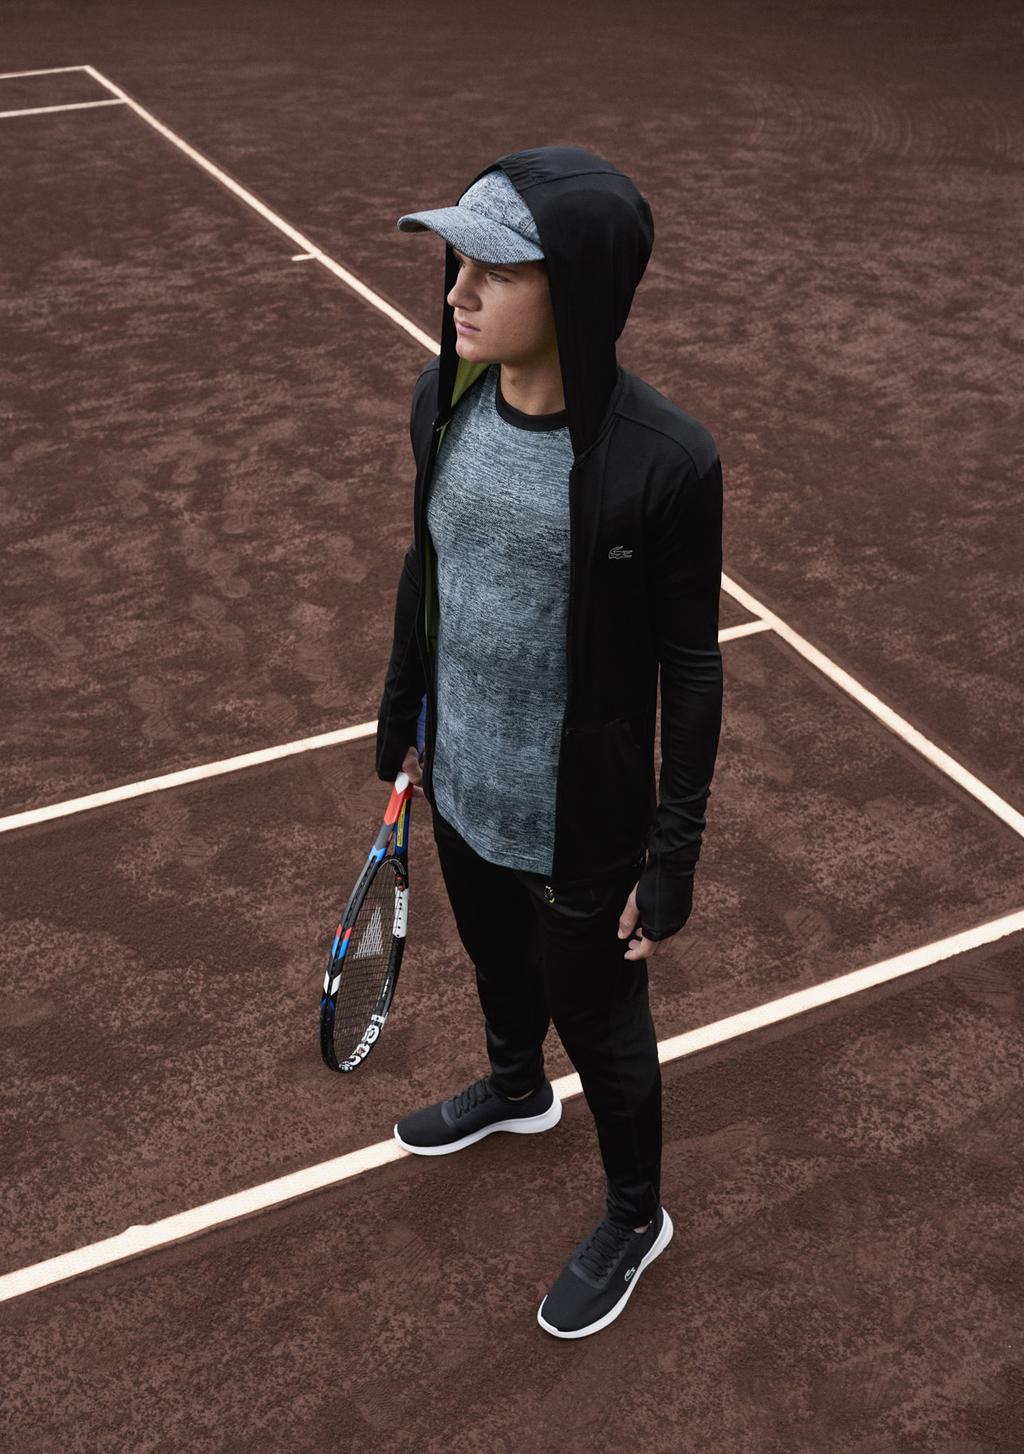 PERFORMANCE COLLECTION Exclusively reserved to men, the Tennis Performance collection addresses to athletes looking for clothes with real technical properties.